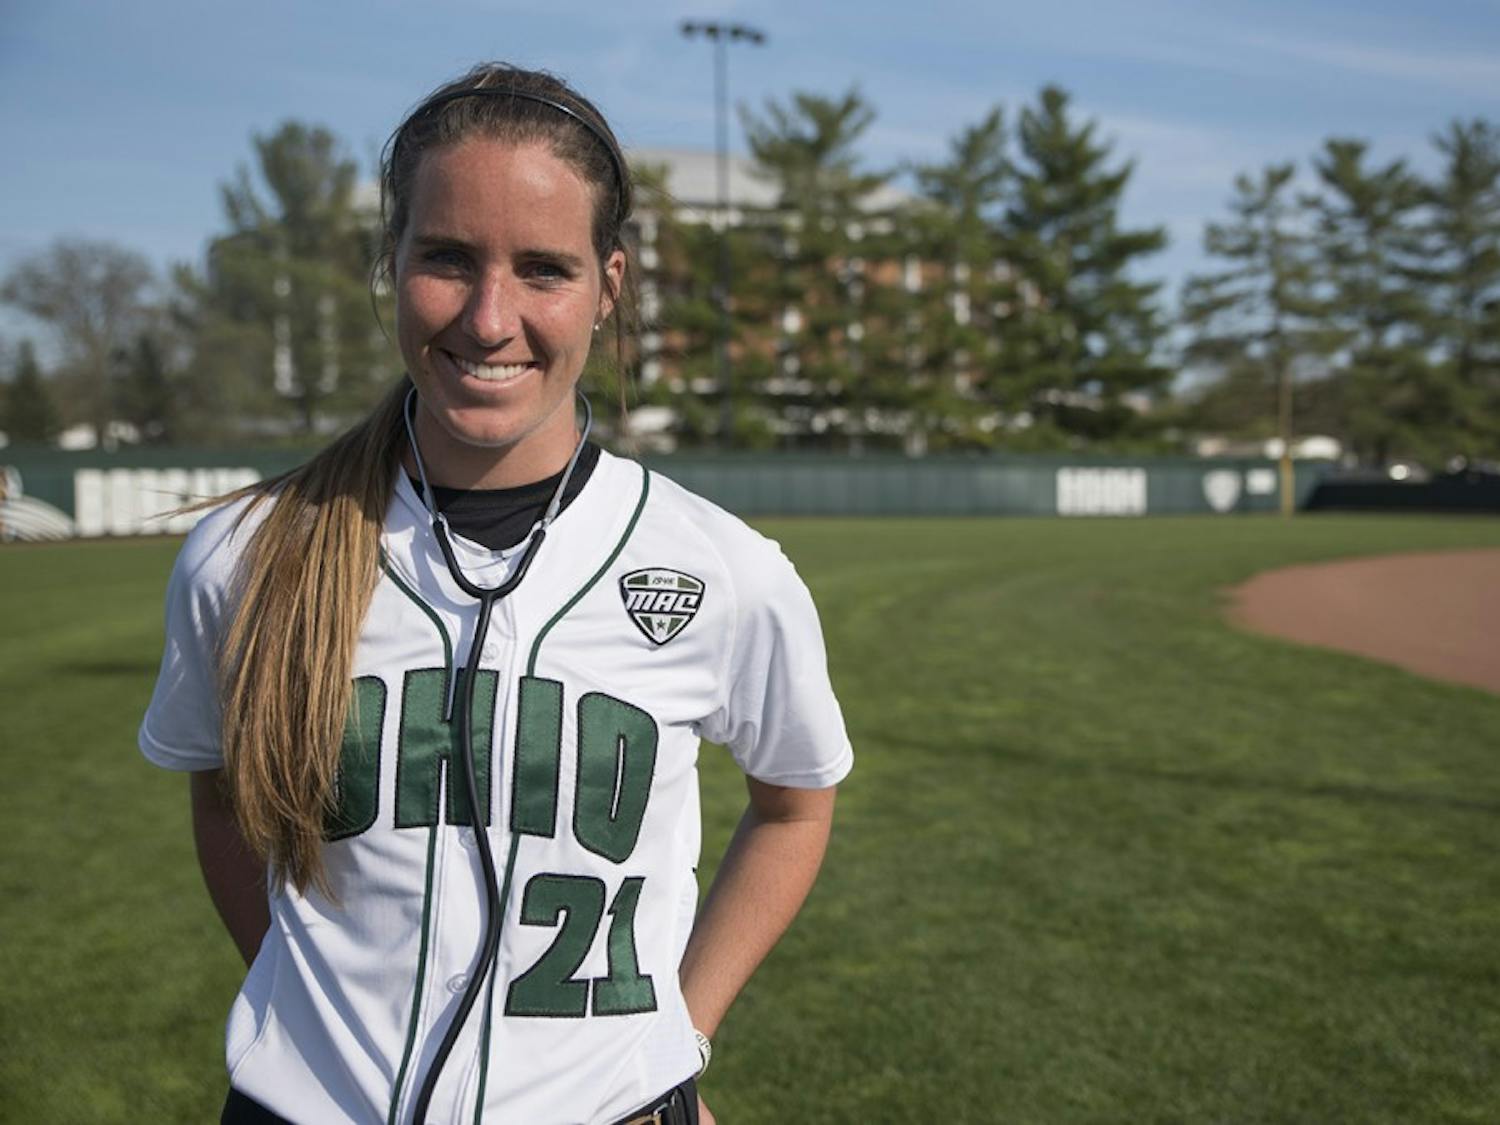 Savannah Jo Dorsey poses for a portrait at the Ohio University Women's Softball Complex in 2017.